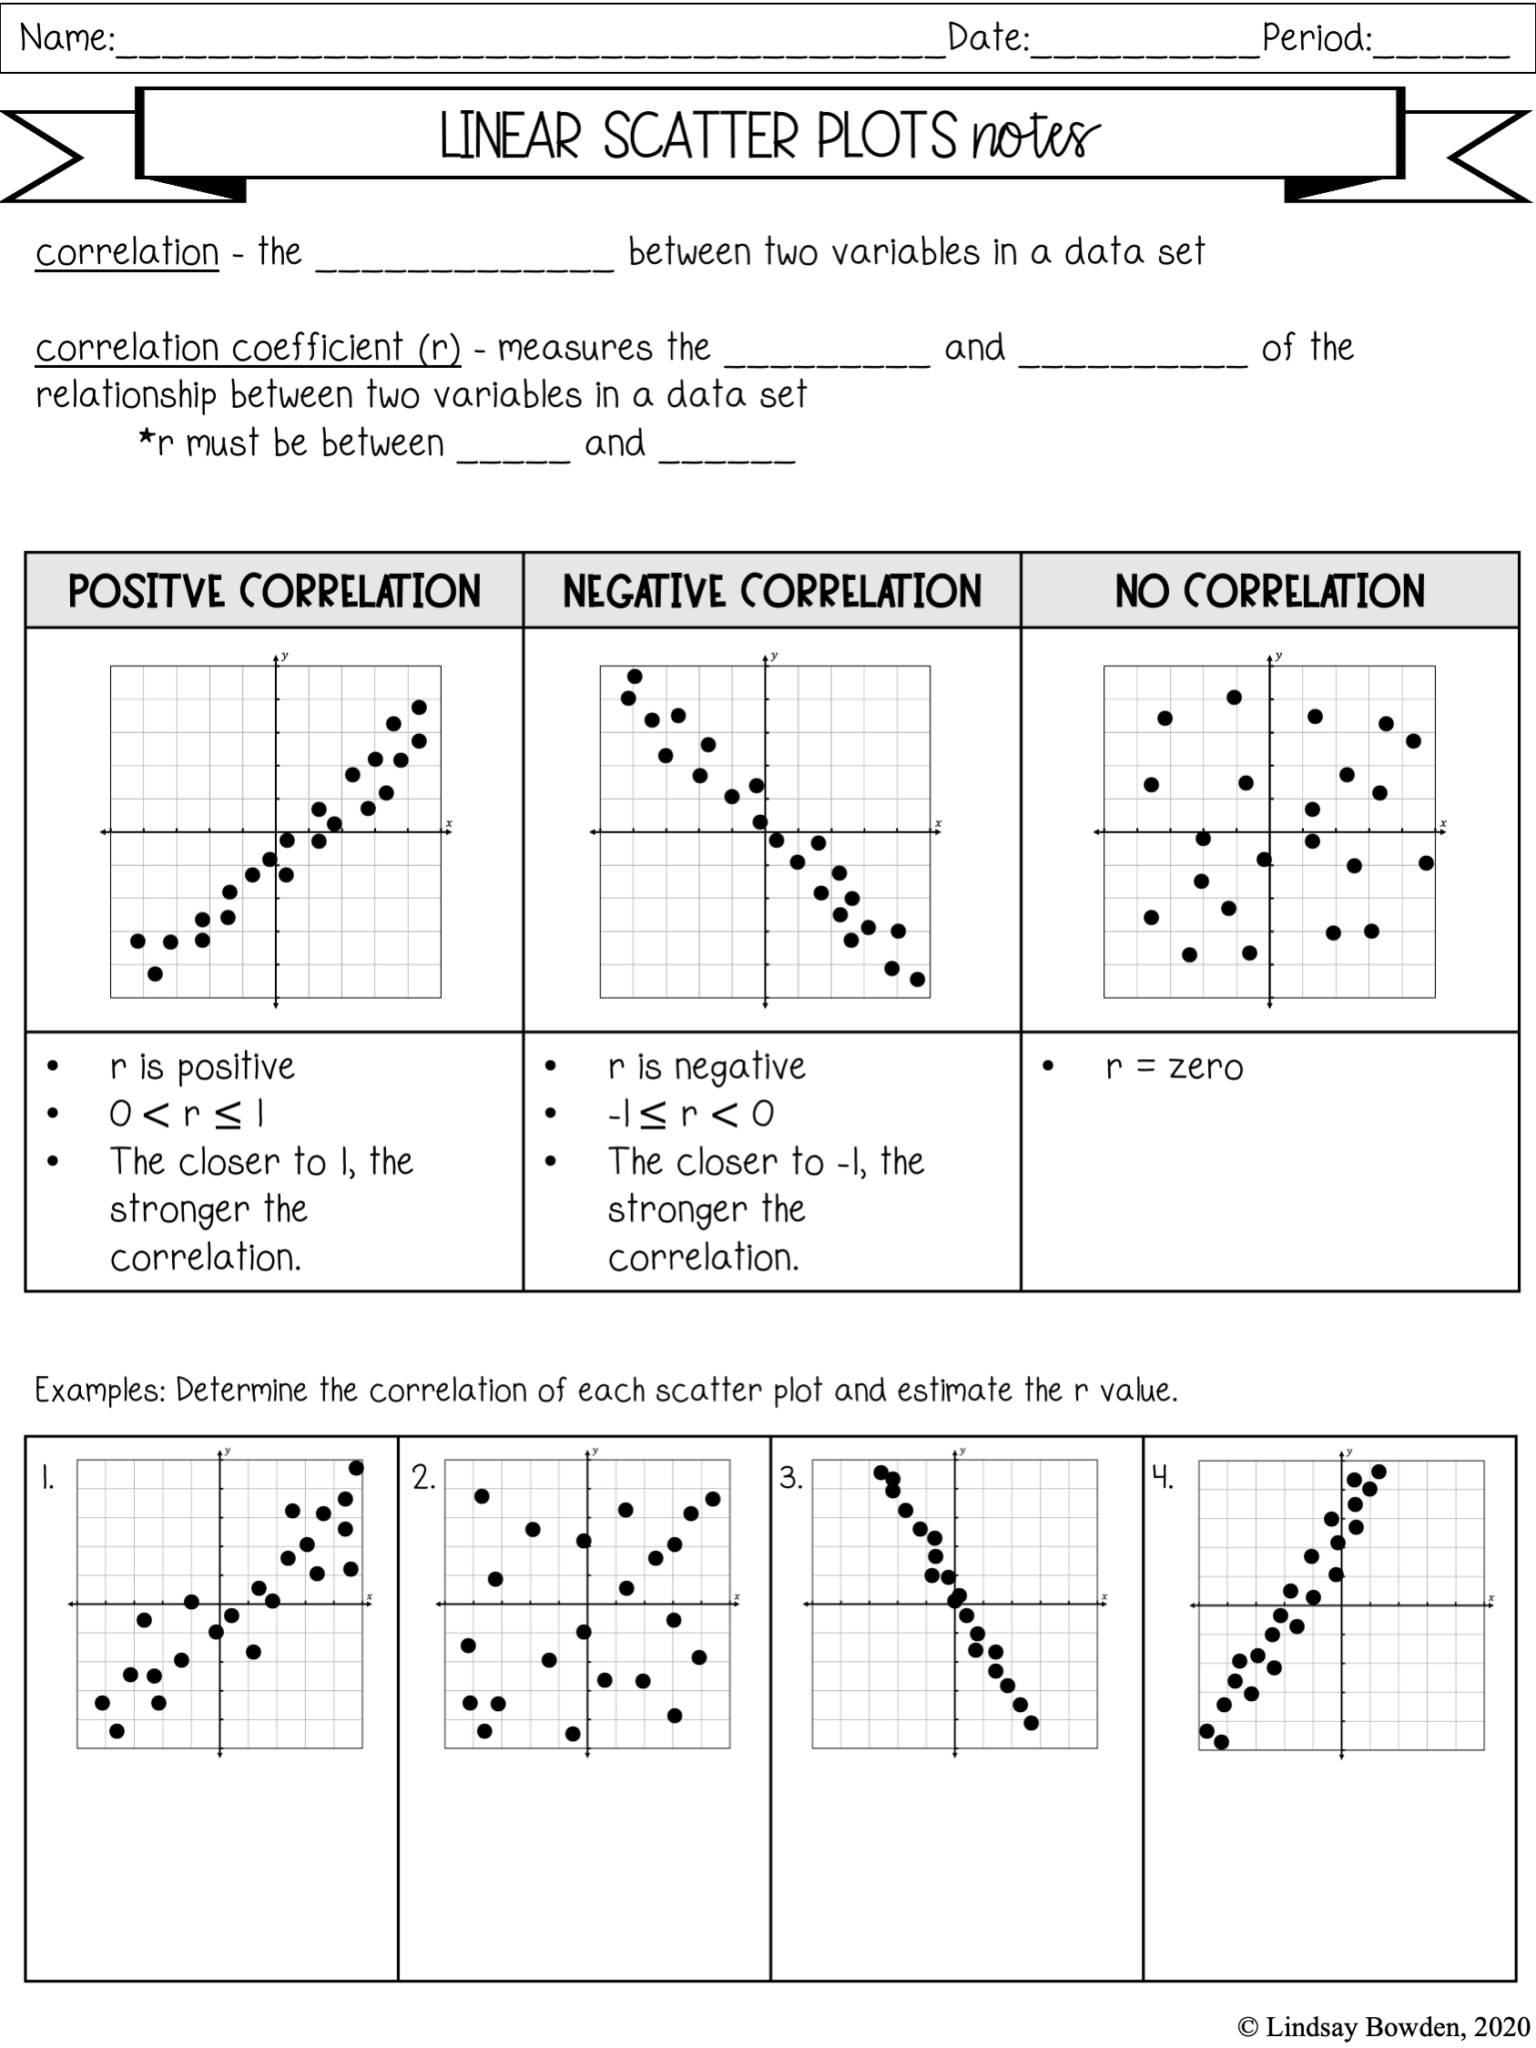 linear scatter plot word problems